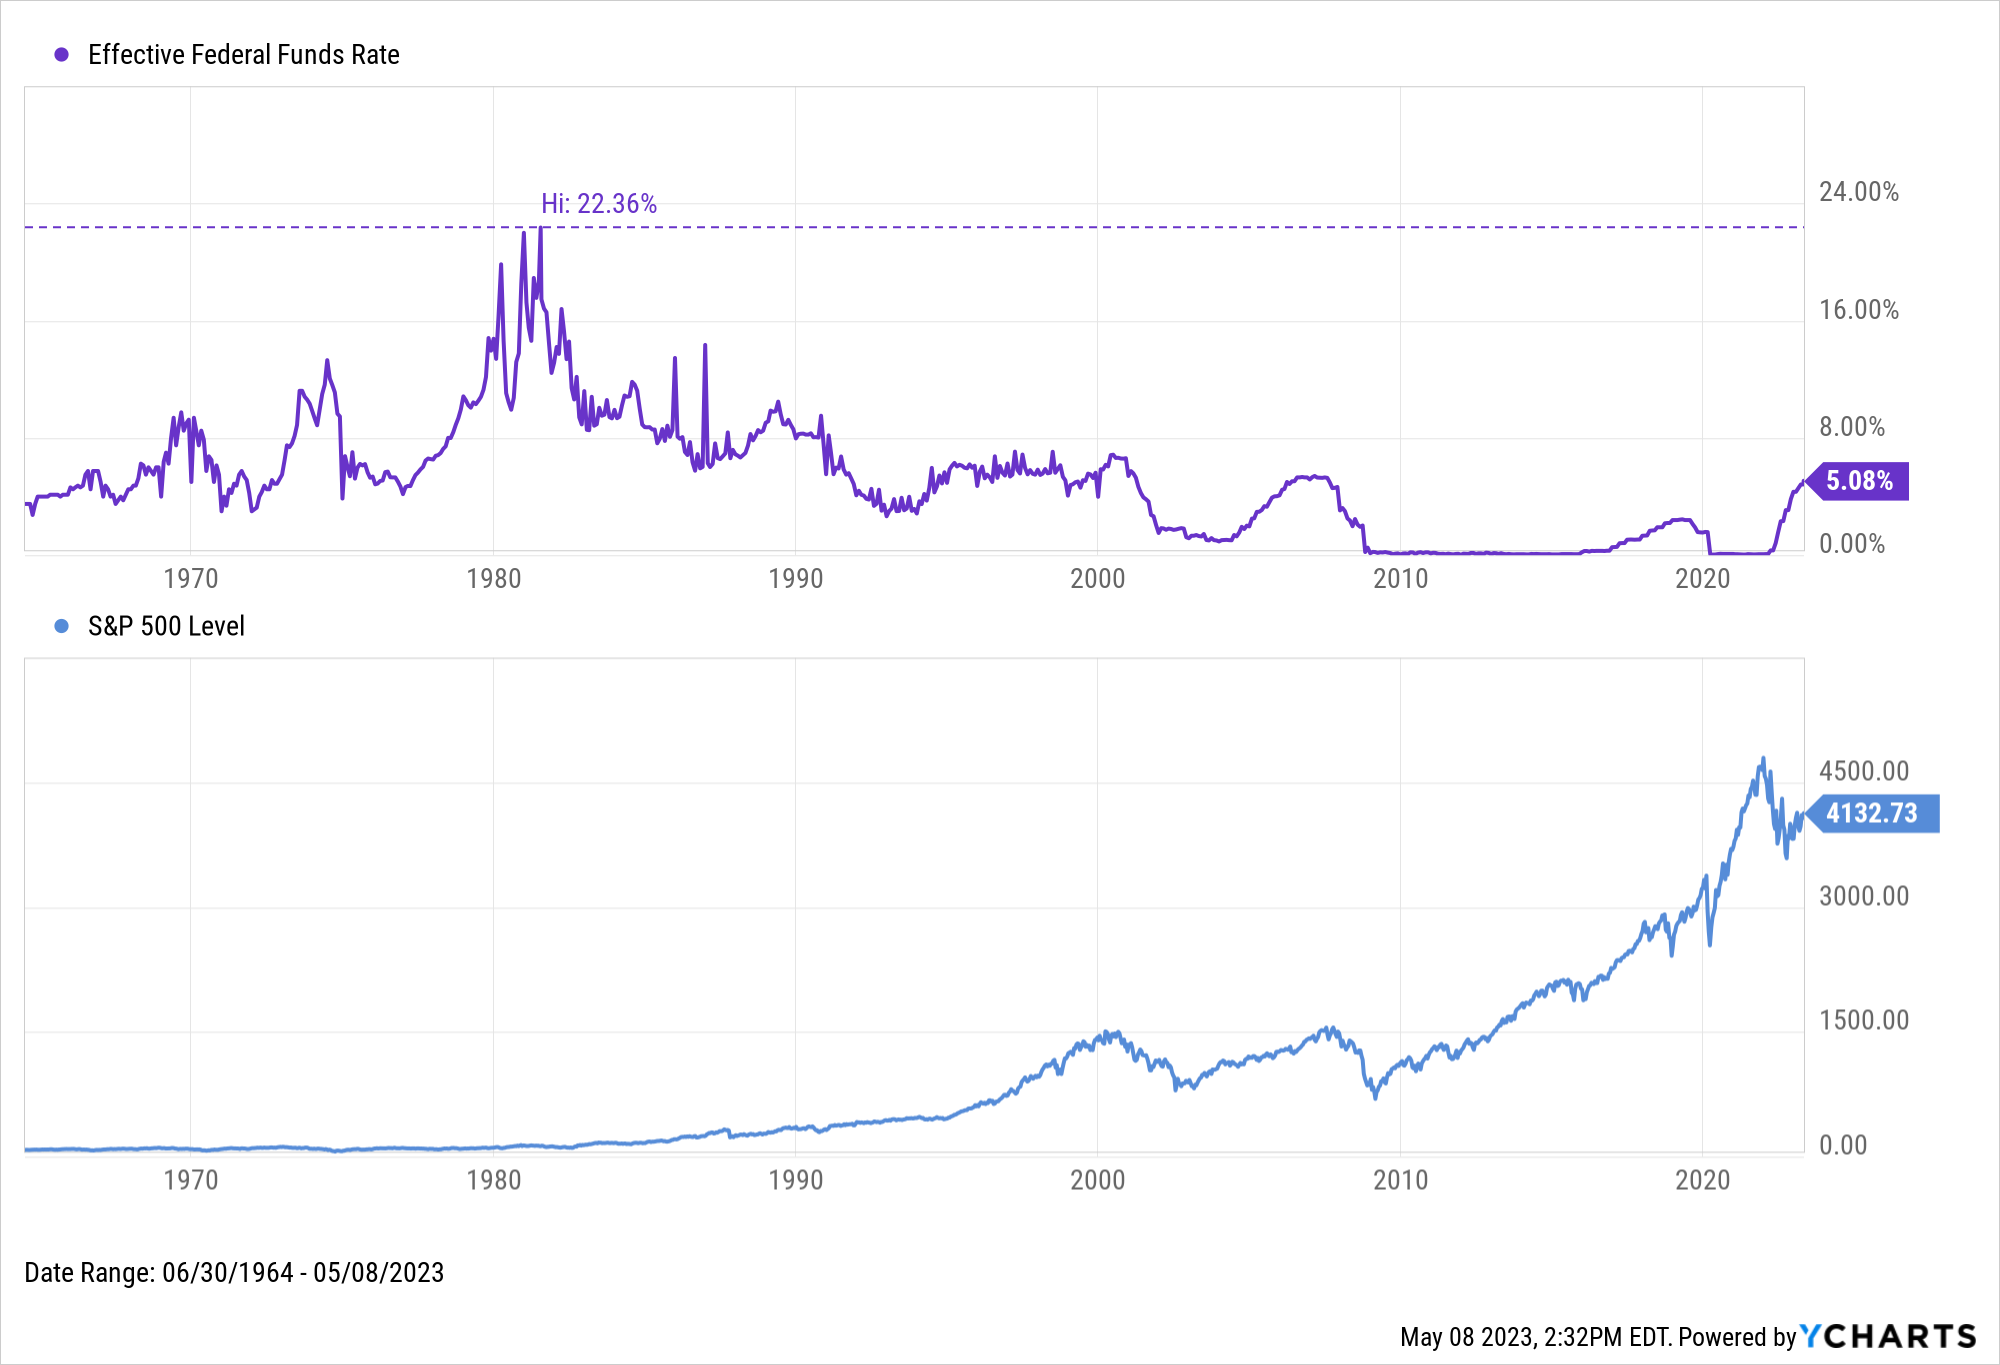 Historical chart of Fed Funds Rate vs. S&P 500